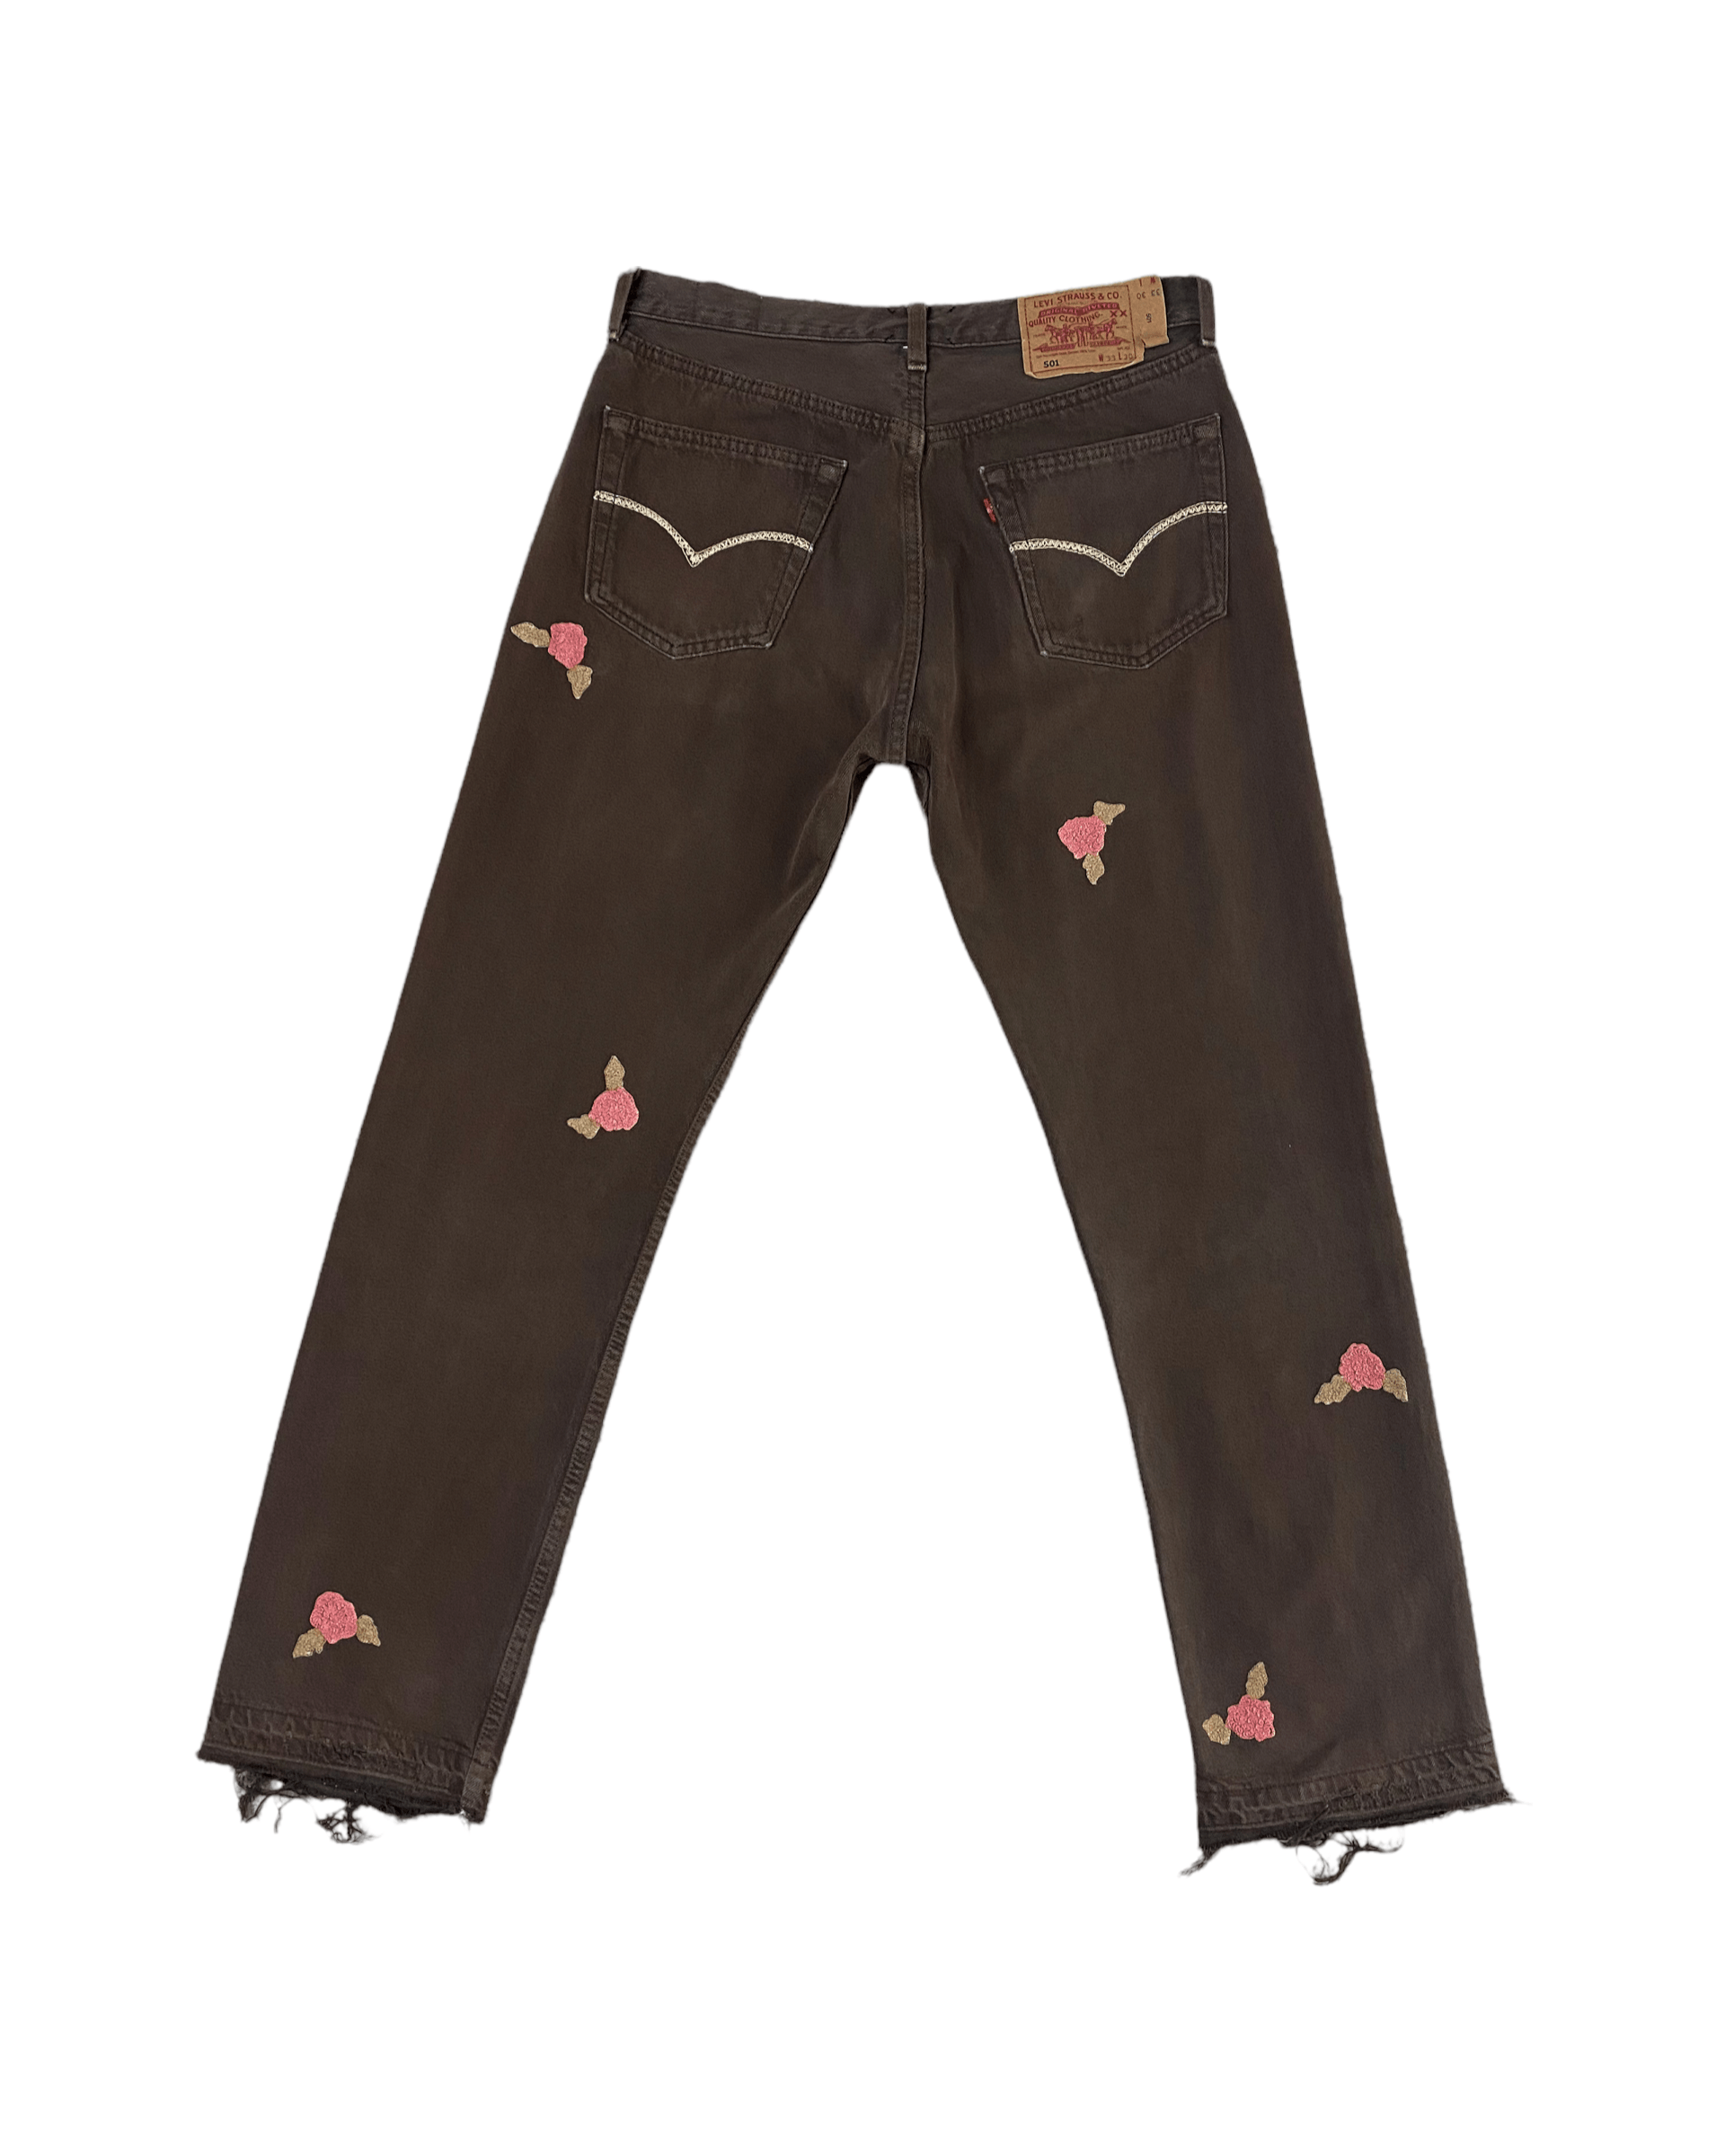 ROSES JEANS - easter edition - Nicolò Puccini